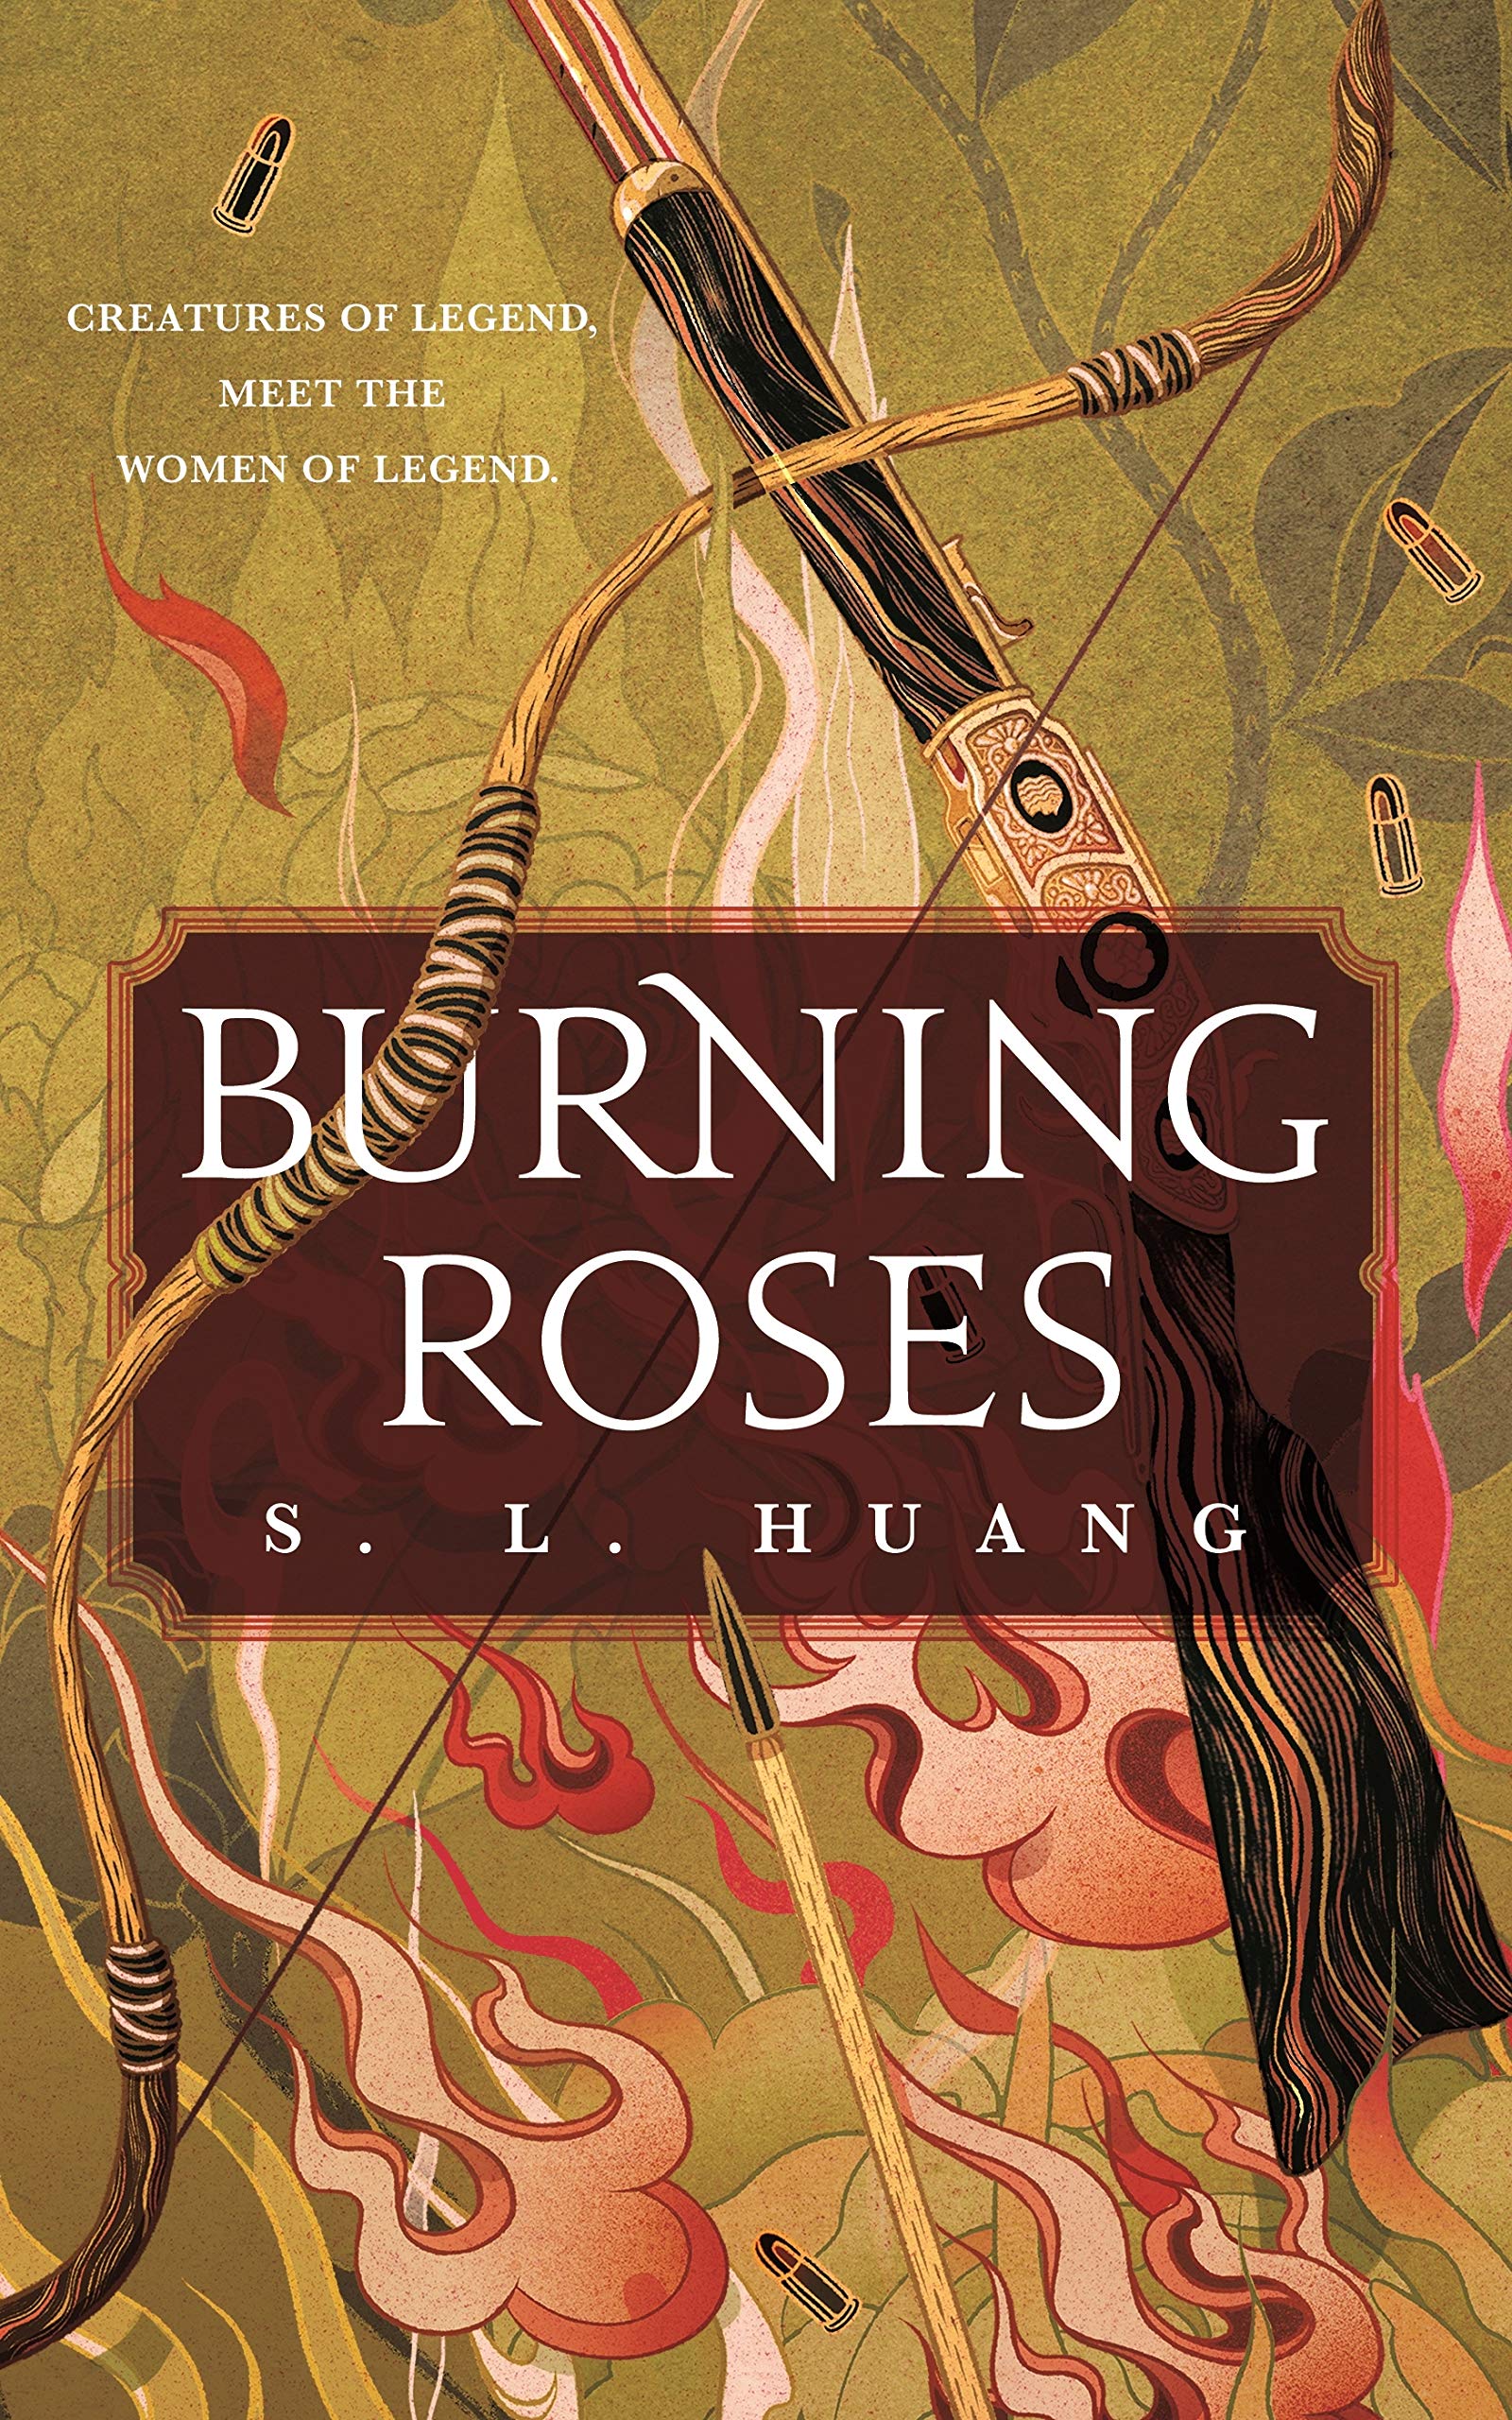 Burning Roses by S.L. Huang